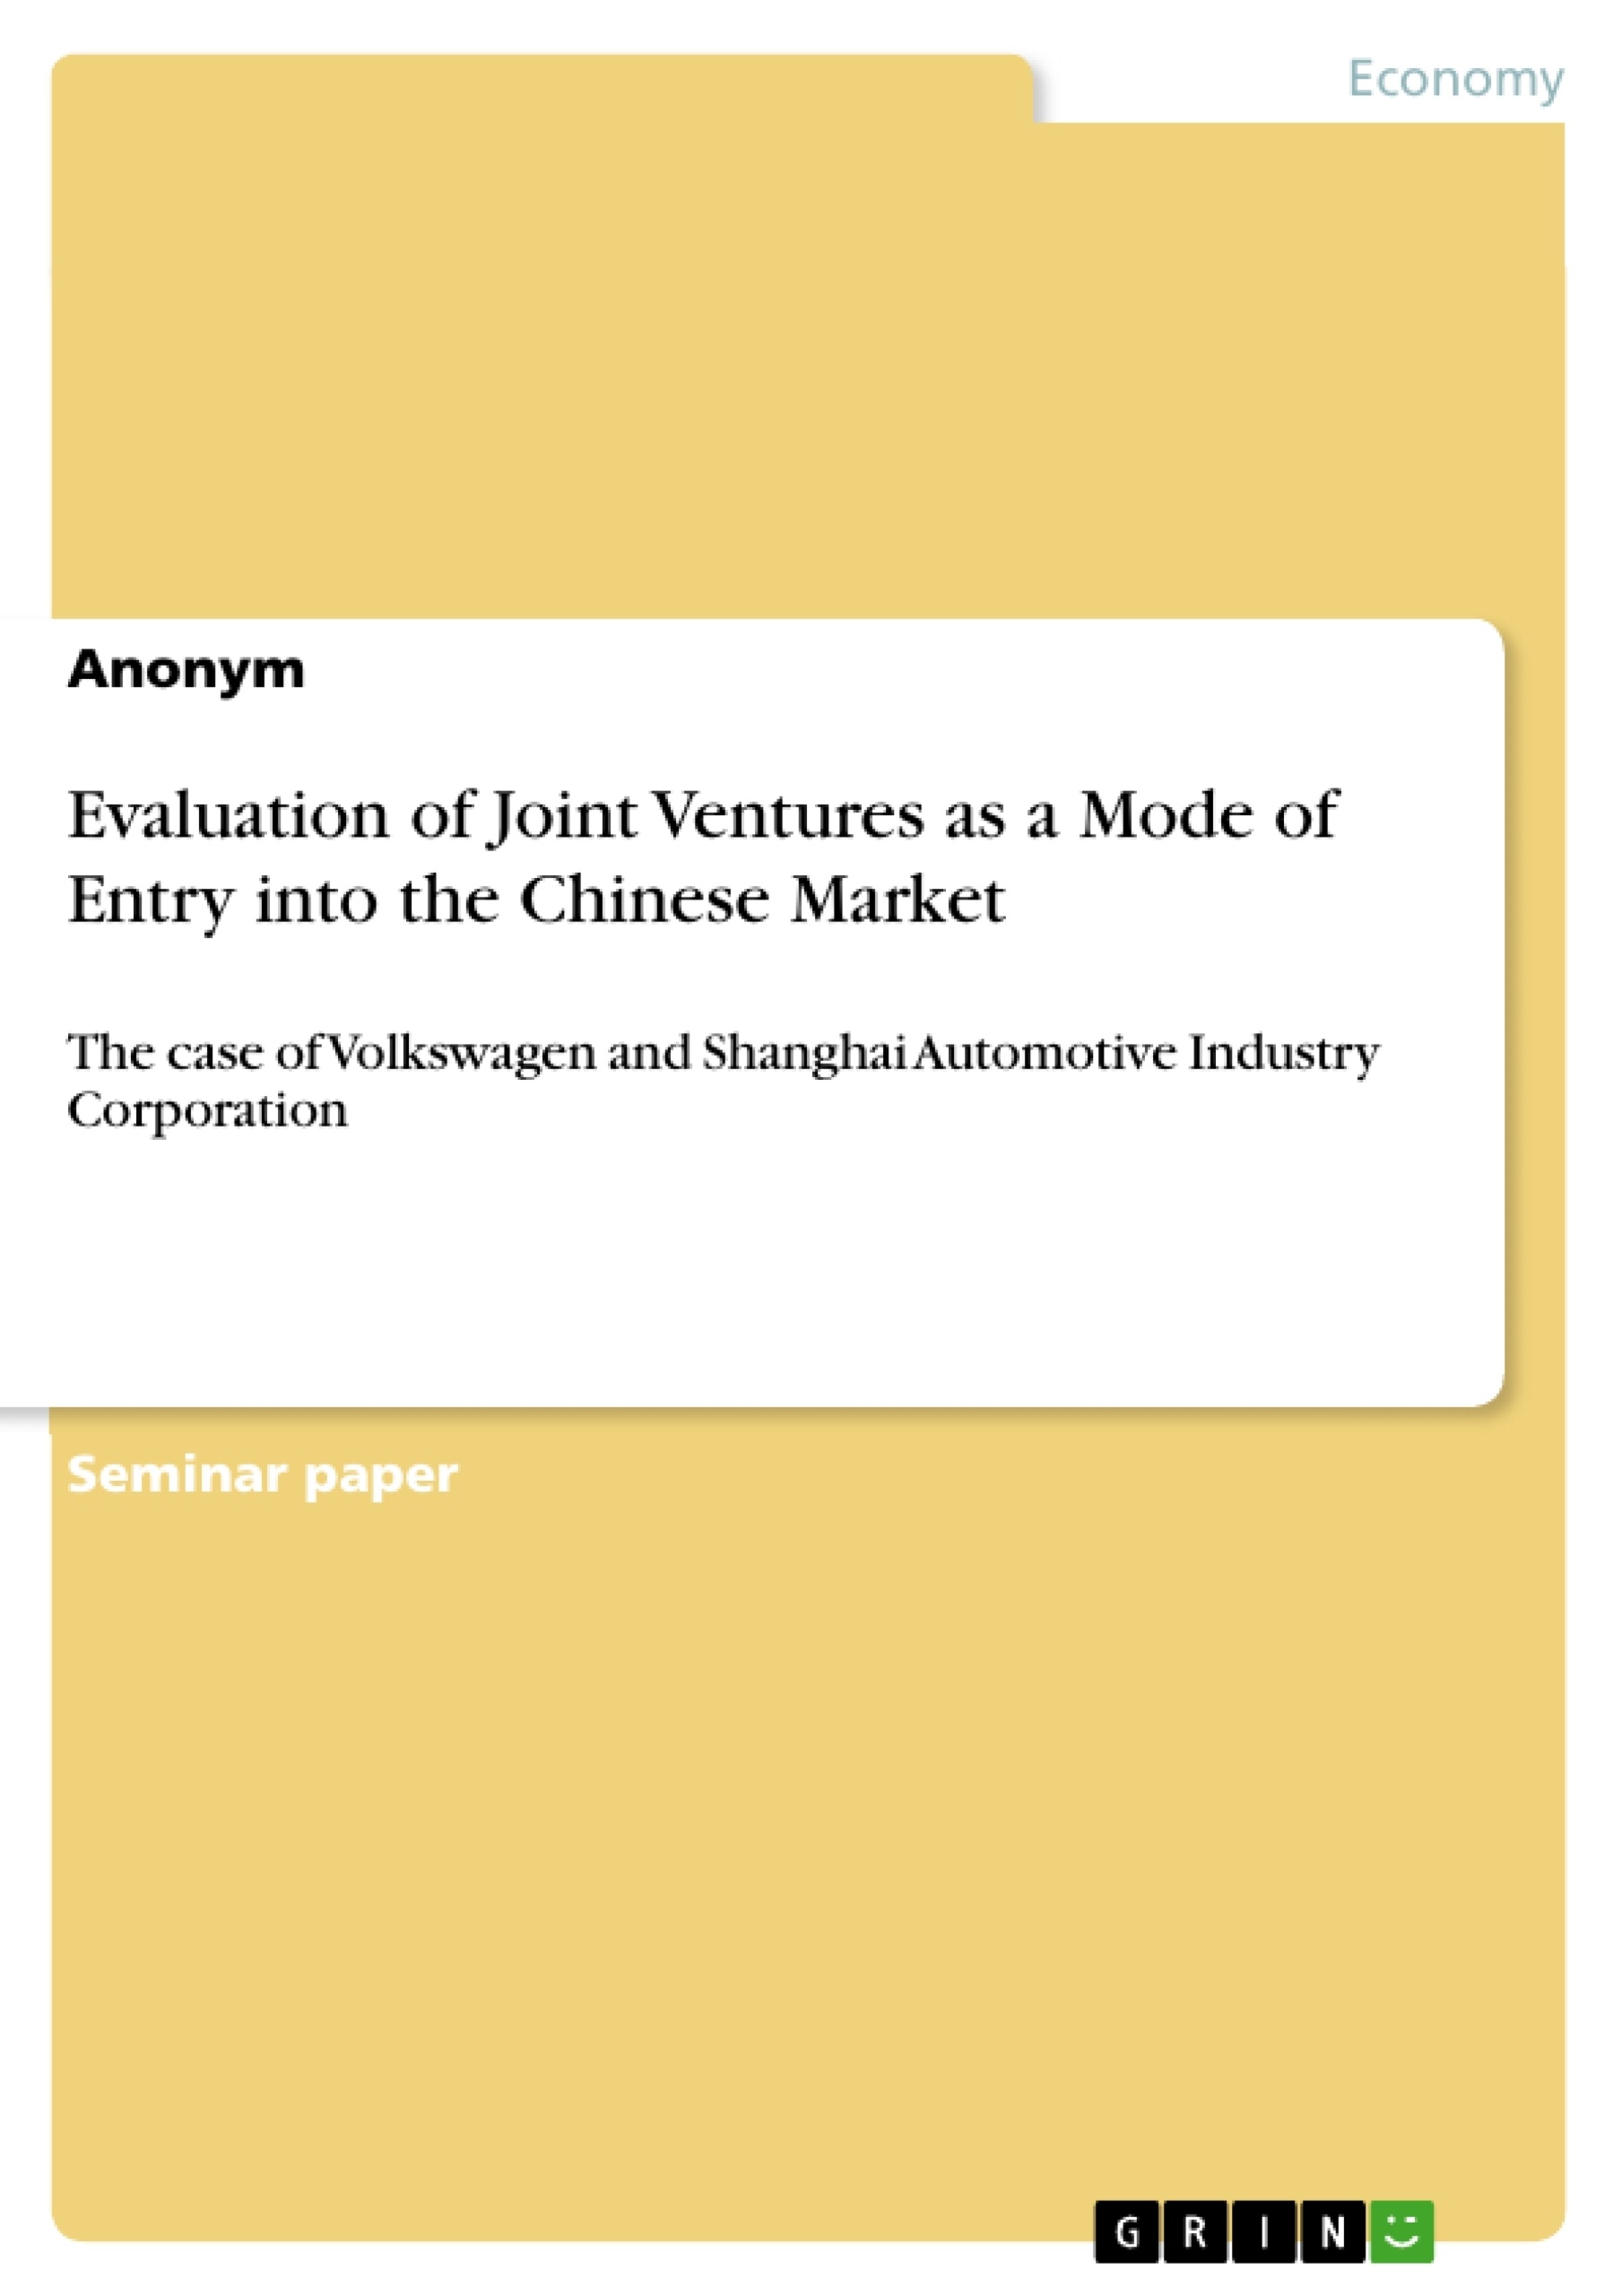 Title: Evaluation of Joint Ventures as a Mode of Entry into the Chinese Market